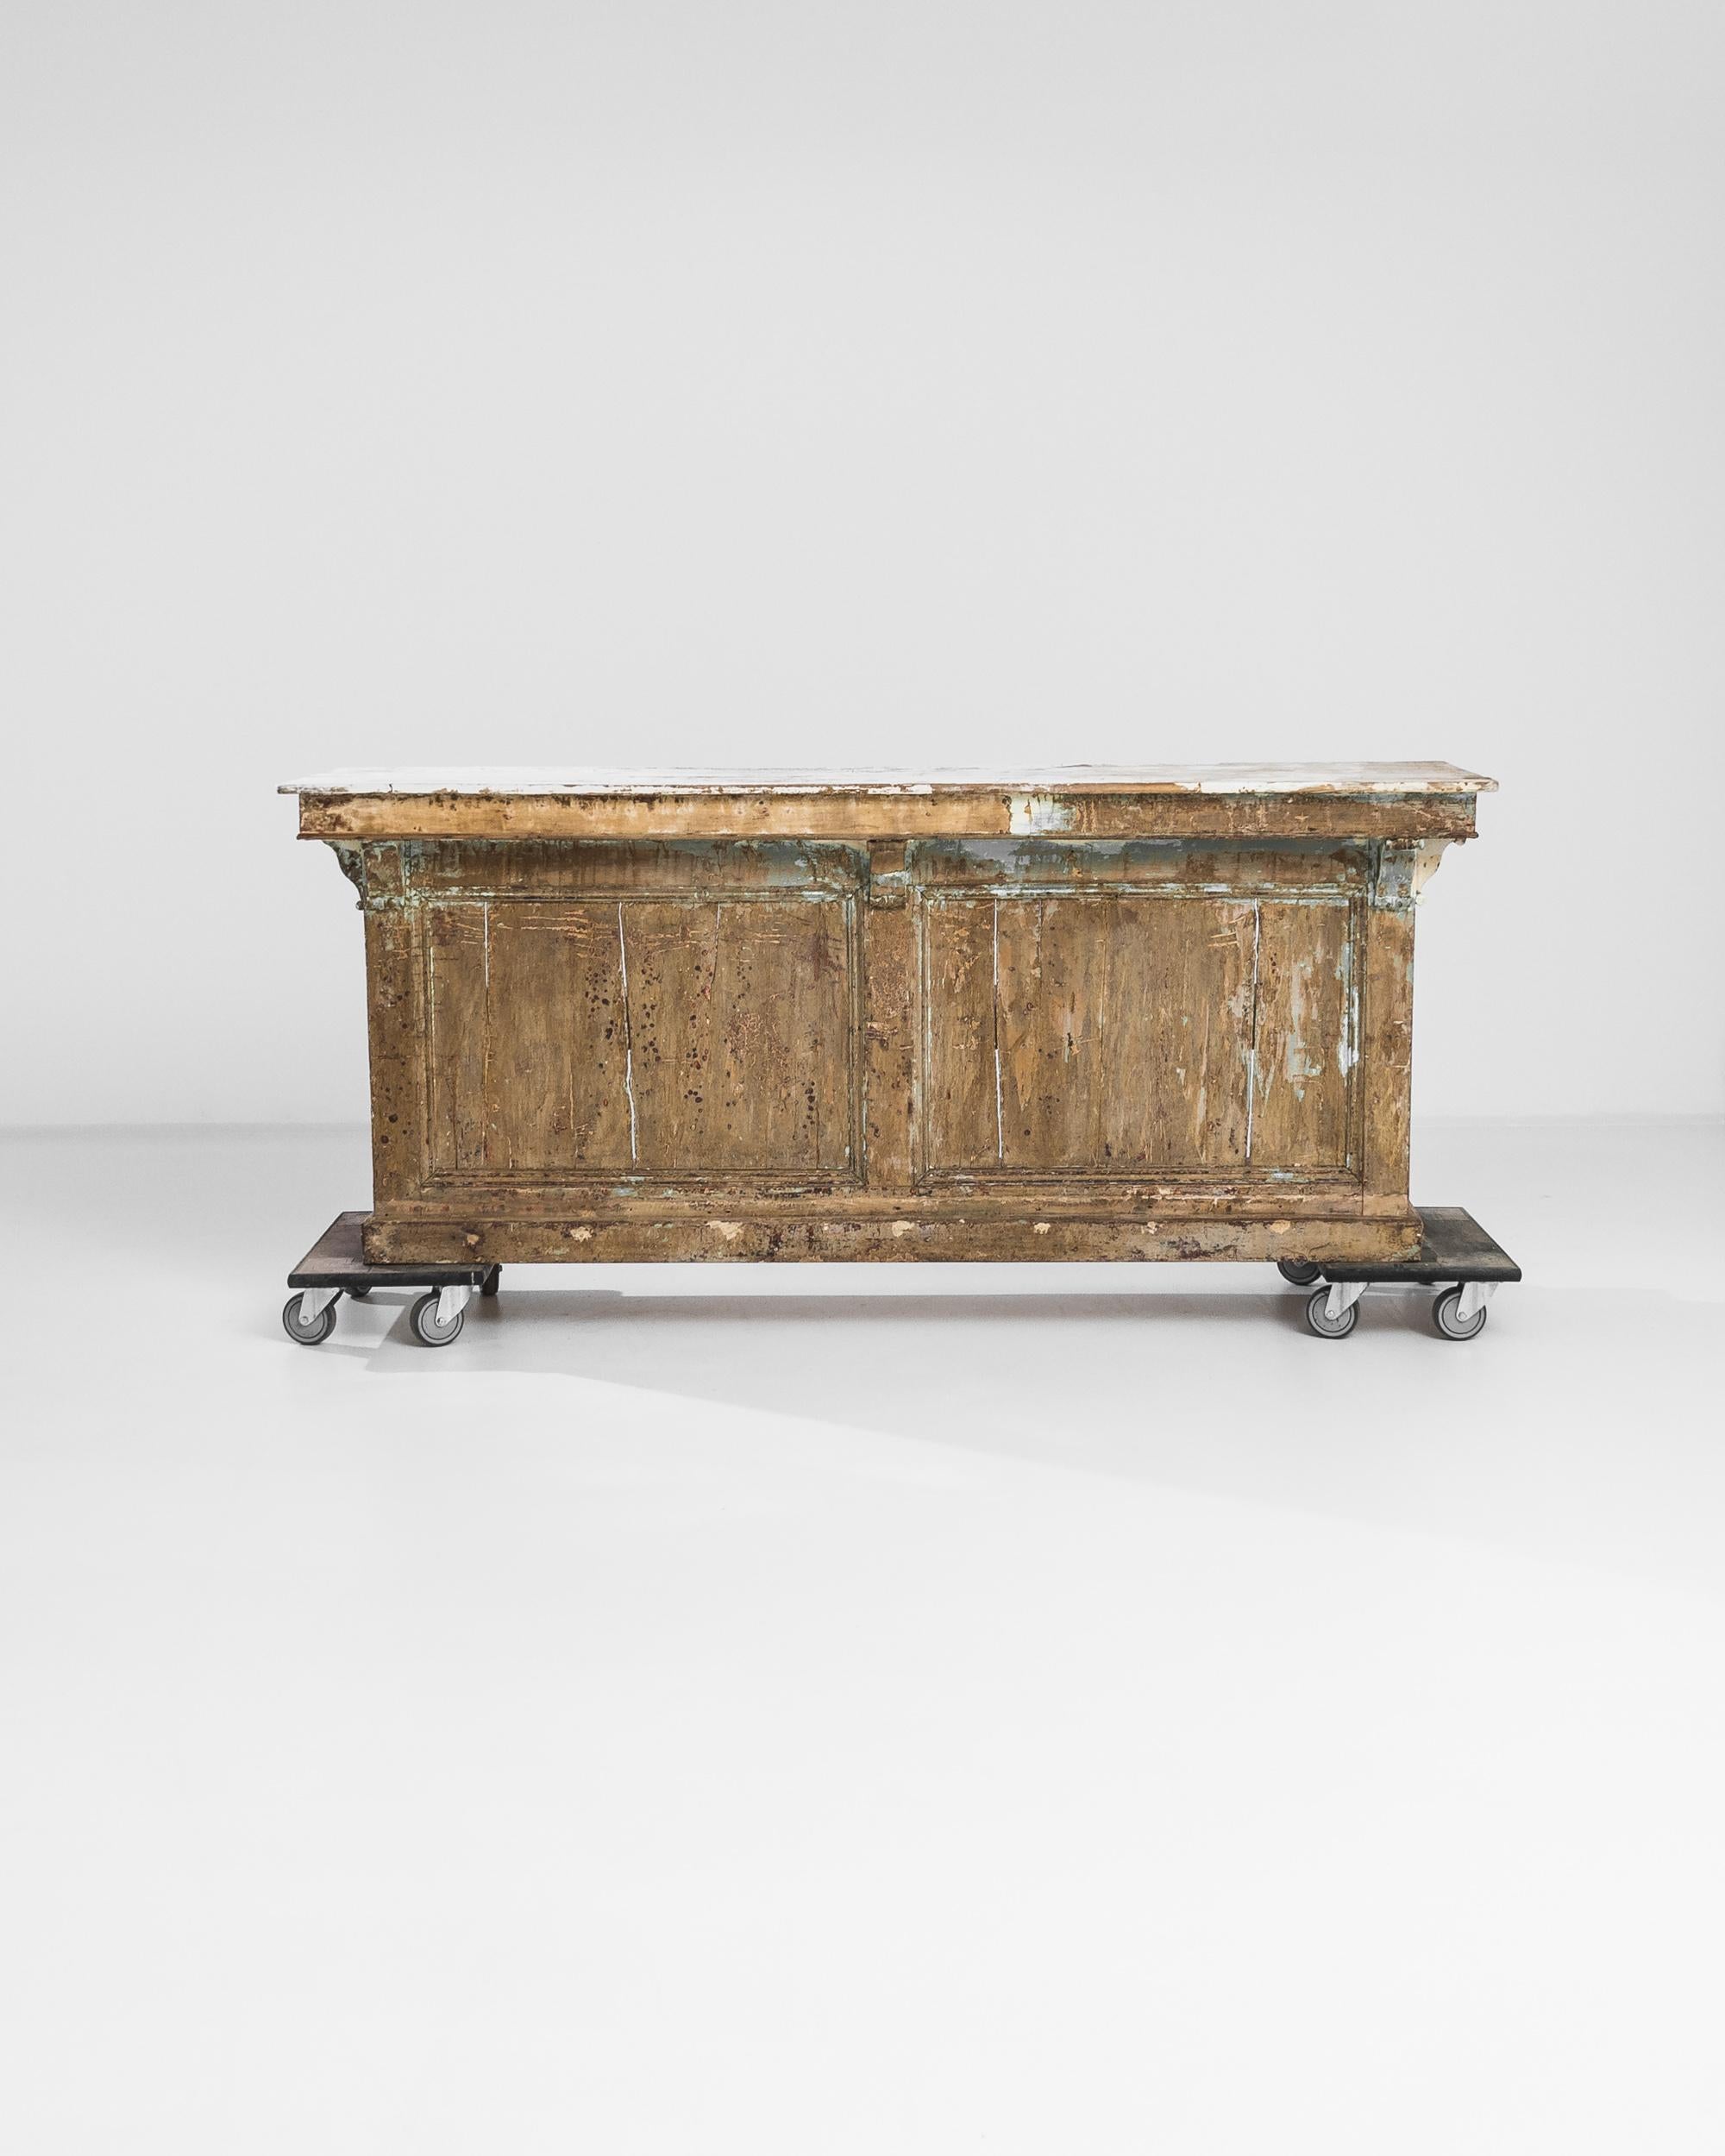 A wooden bar from France circa 1900. Positively enormous in stature, this architectural piece exudes a powerful sense of history and classically hand-crafted beauty. Revealing its past as a much-used anchor of commerce, the peachy brown that coats